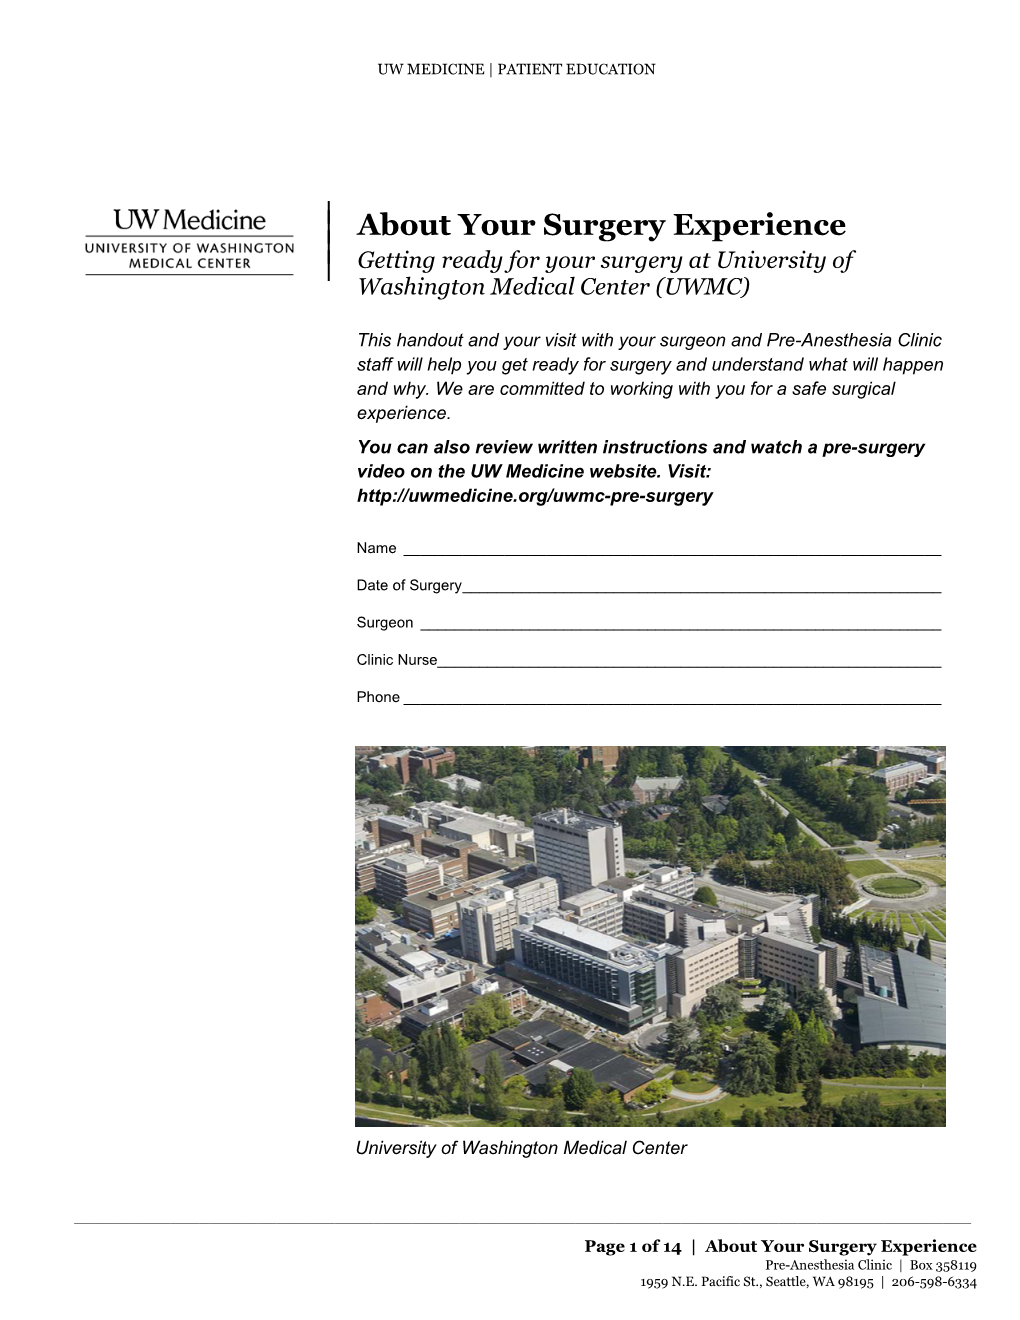 About Your Surgery Experience | | Getting Ready for Your Surgery at University of Washington Medical Center (UWMC)